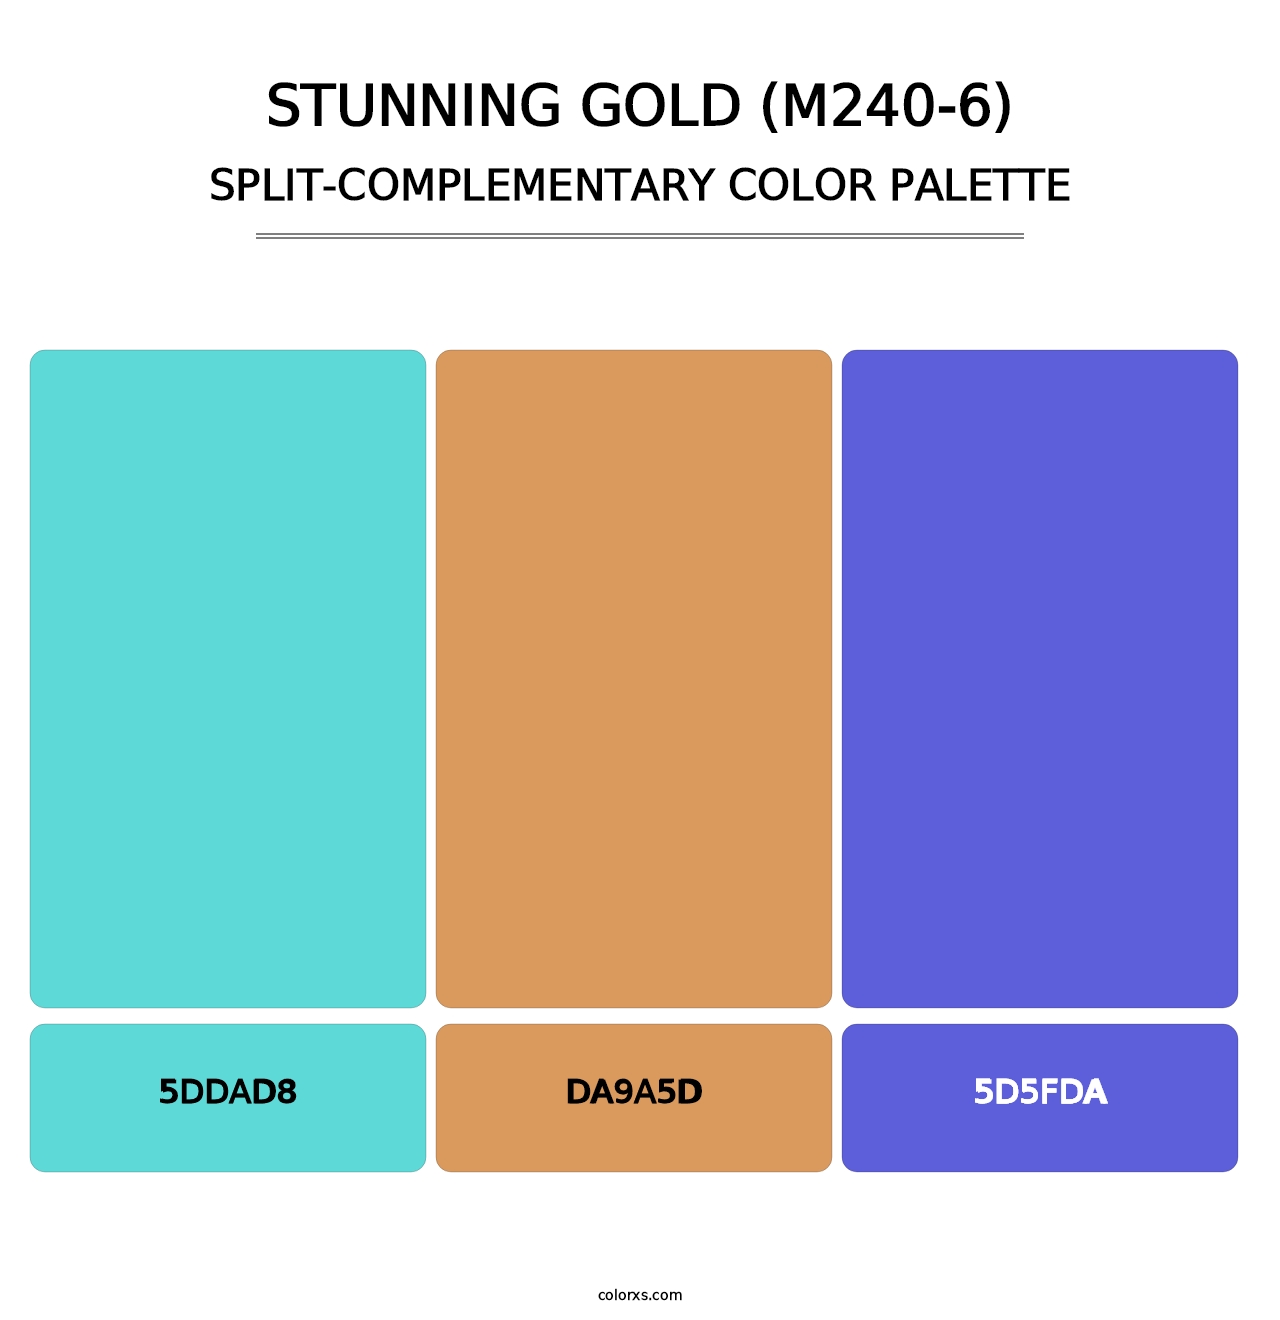 Stunning Gold (M240-6) - Split-Complementary Color Palette